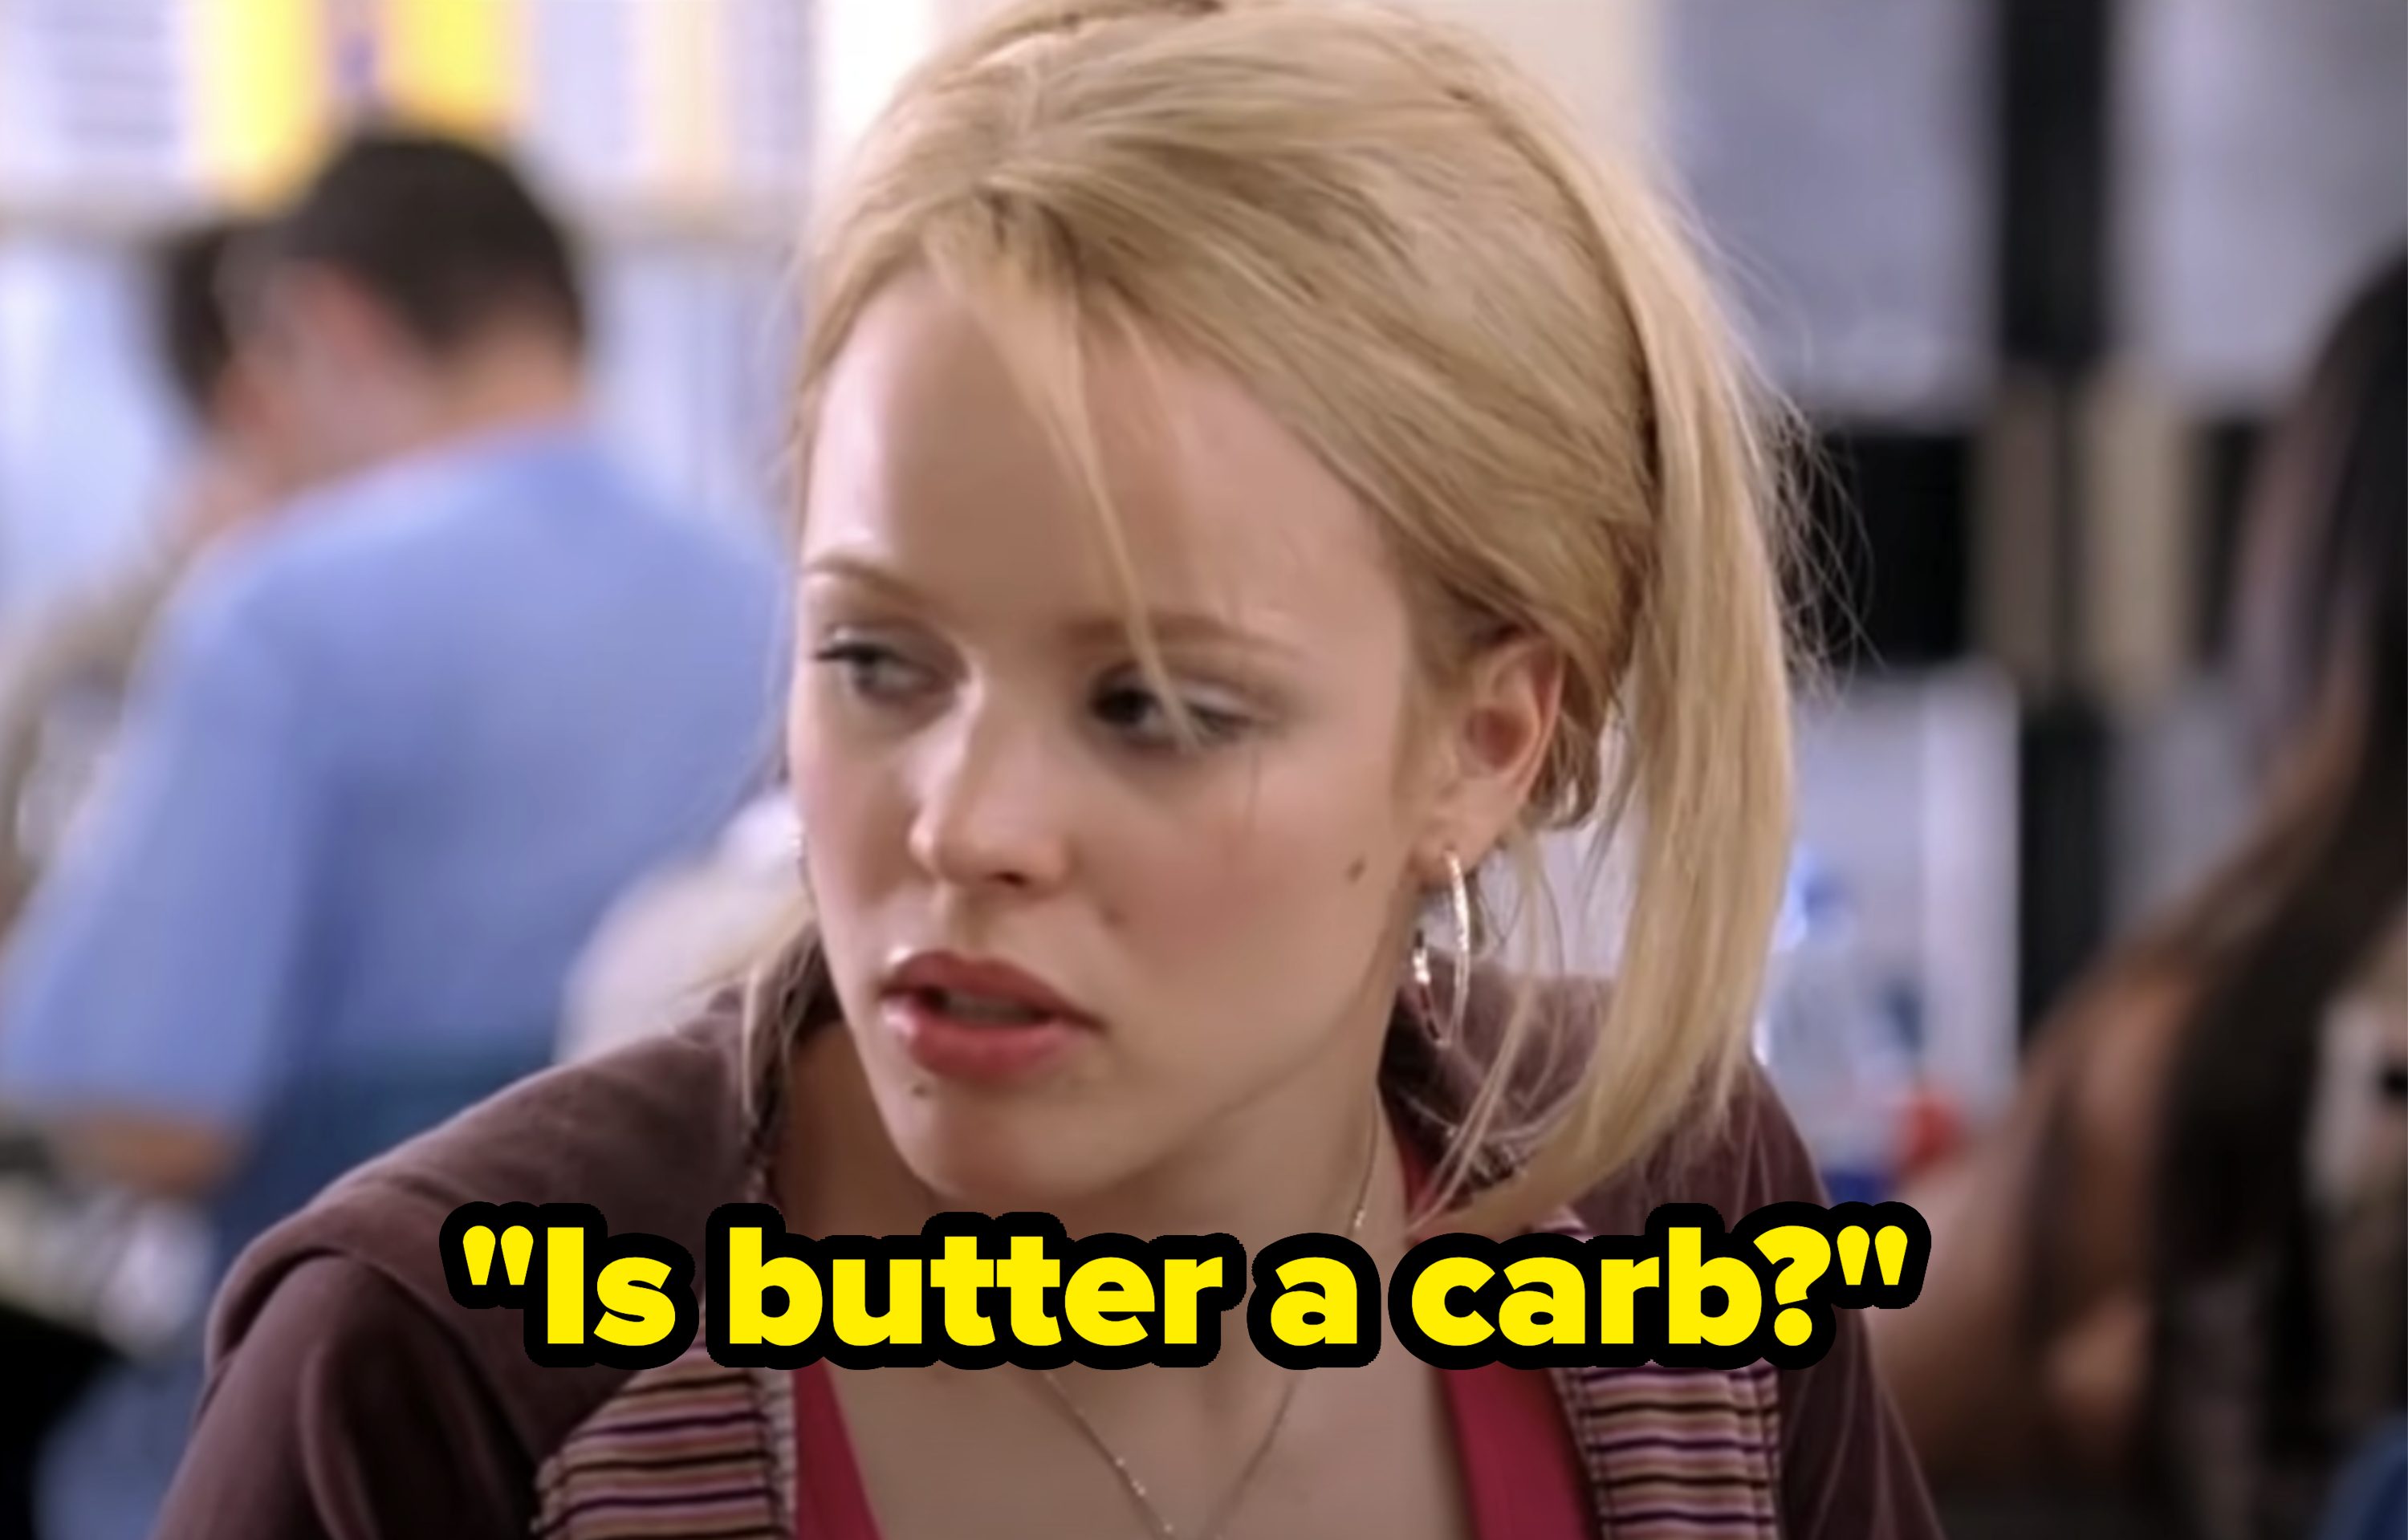 Regina George turns to her left and asks &quot;Is butter a carb?&quot;